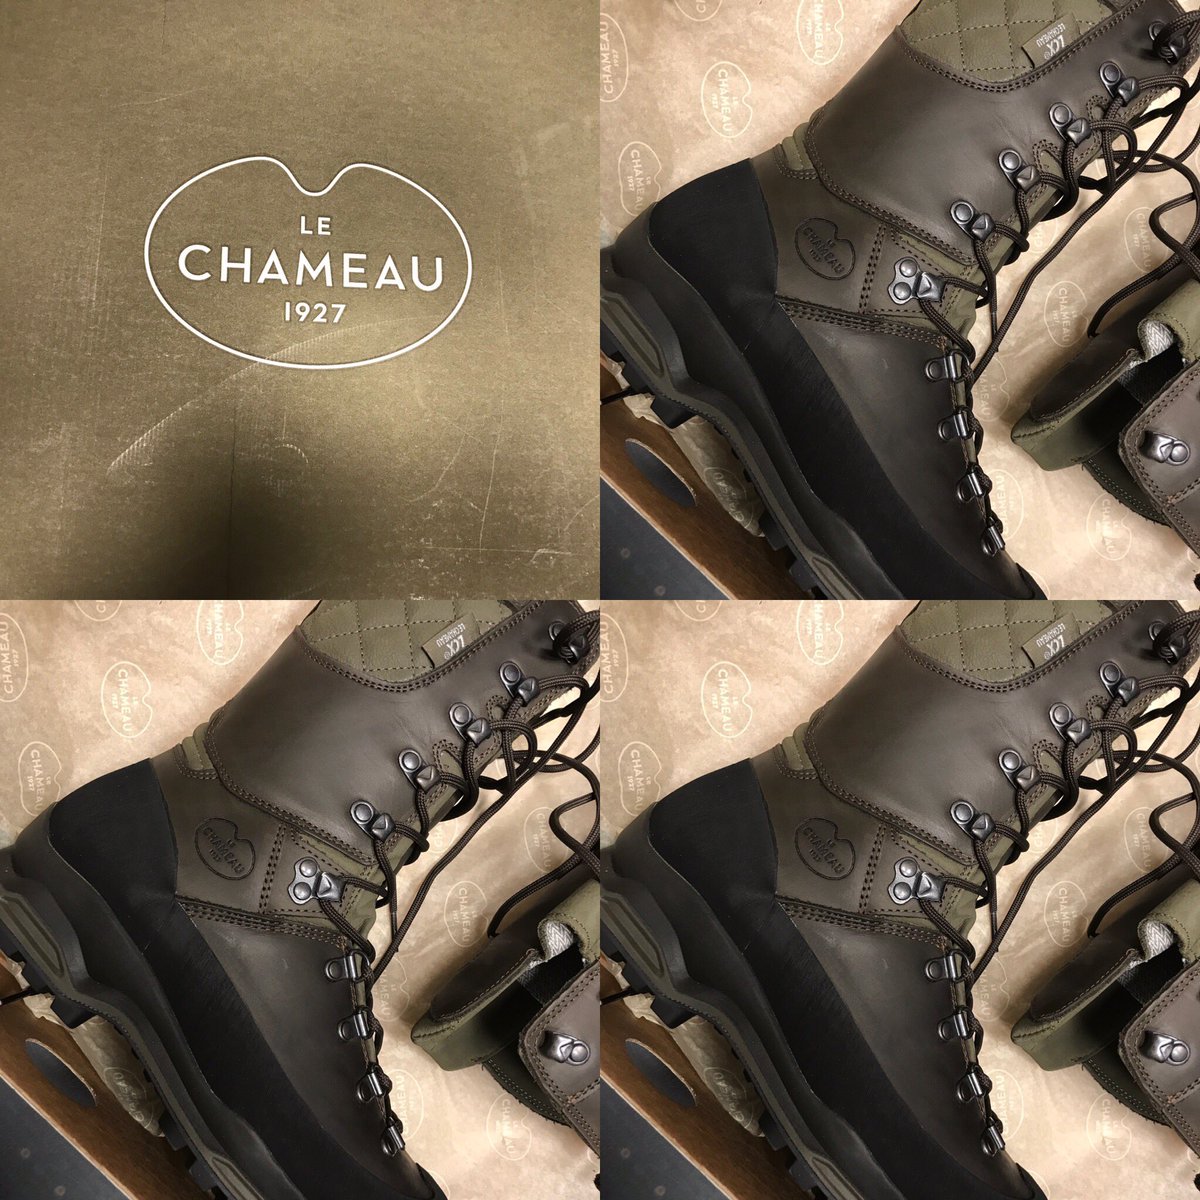 Thank you @LeChameau1927 for designing THE perfect boot ❤️ them 🙌🏻 #perfectboot #lechameau available @rkstockcraft #WinterIsHere #bootsforwalking #shootingboots #trekking #hiking #outdoorpursuits